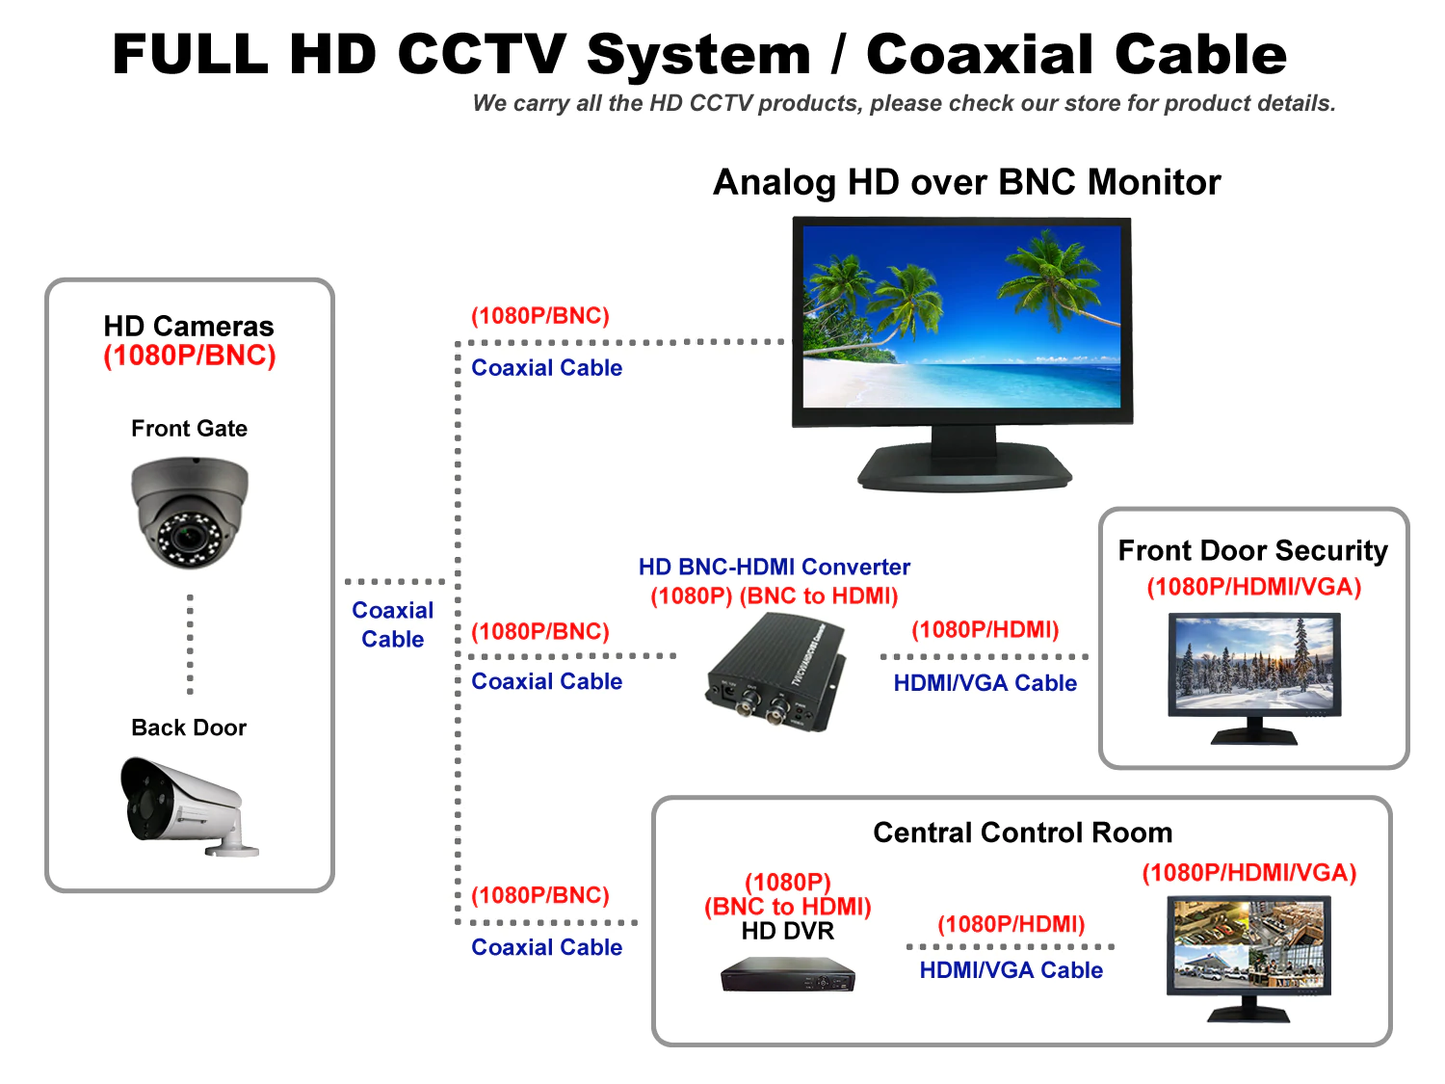 [NEW] [AP-HD236] 23.6" ANALOG HD OVER BNC CONNECTION, PERFECT MONITOR FOR APPLICATION WITHOUT DVR, PROFESSIONAL LED SECURITY MONITOR DIRECTLY WORK WITH HD-TVI, AHD, CVI & CVBS CAMERA, 1X HDMI & 2X BNC INPUTS FOR CCTV DVR HOME OFFICE SURVEILLANCE SYSTEM